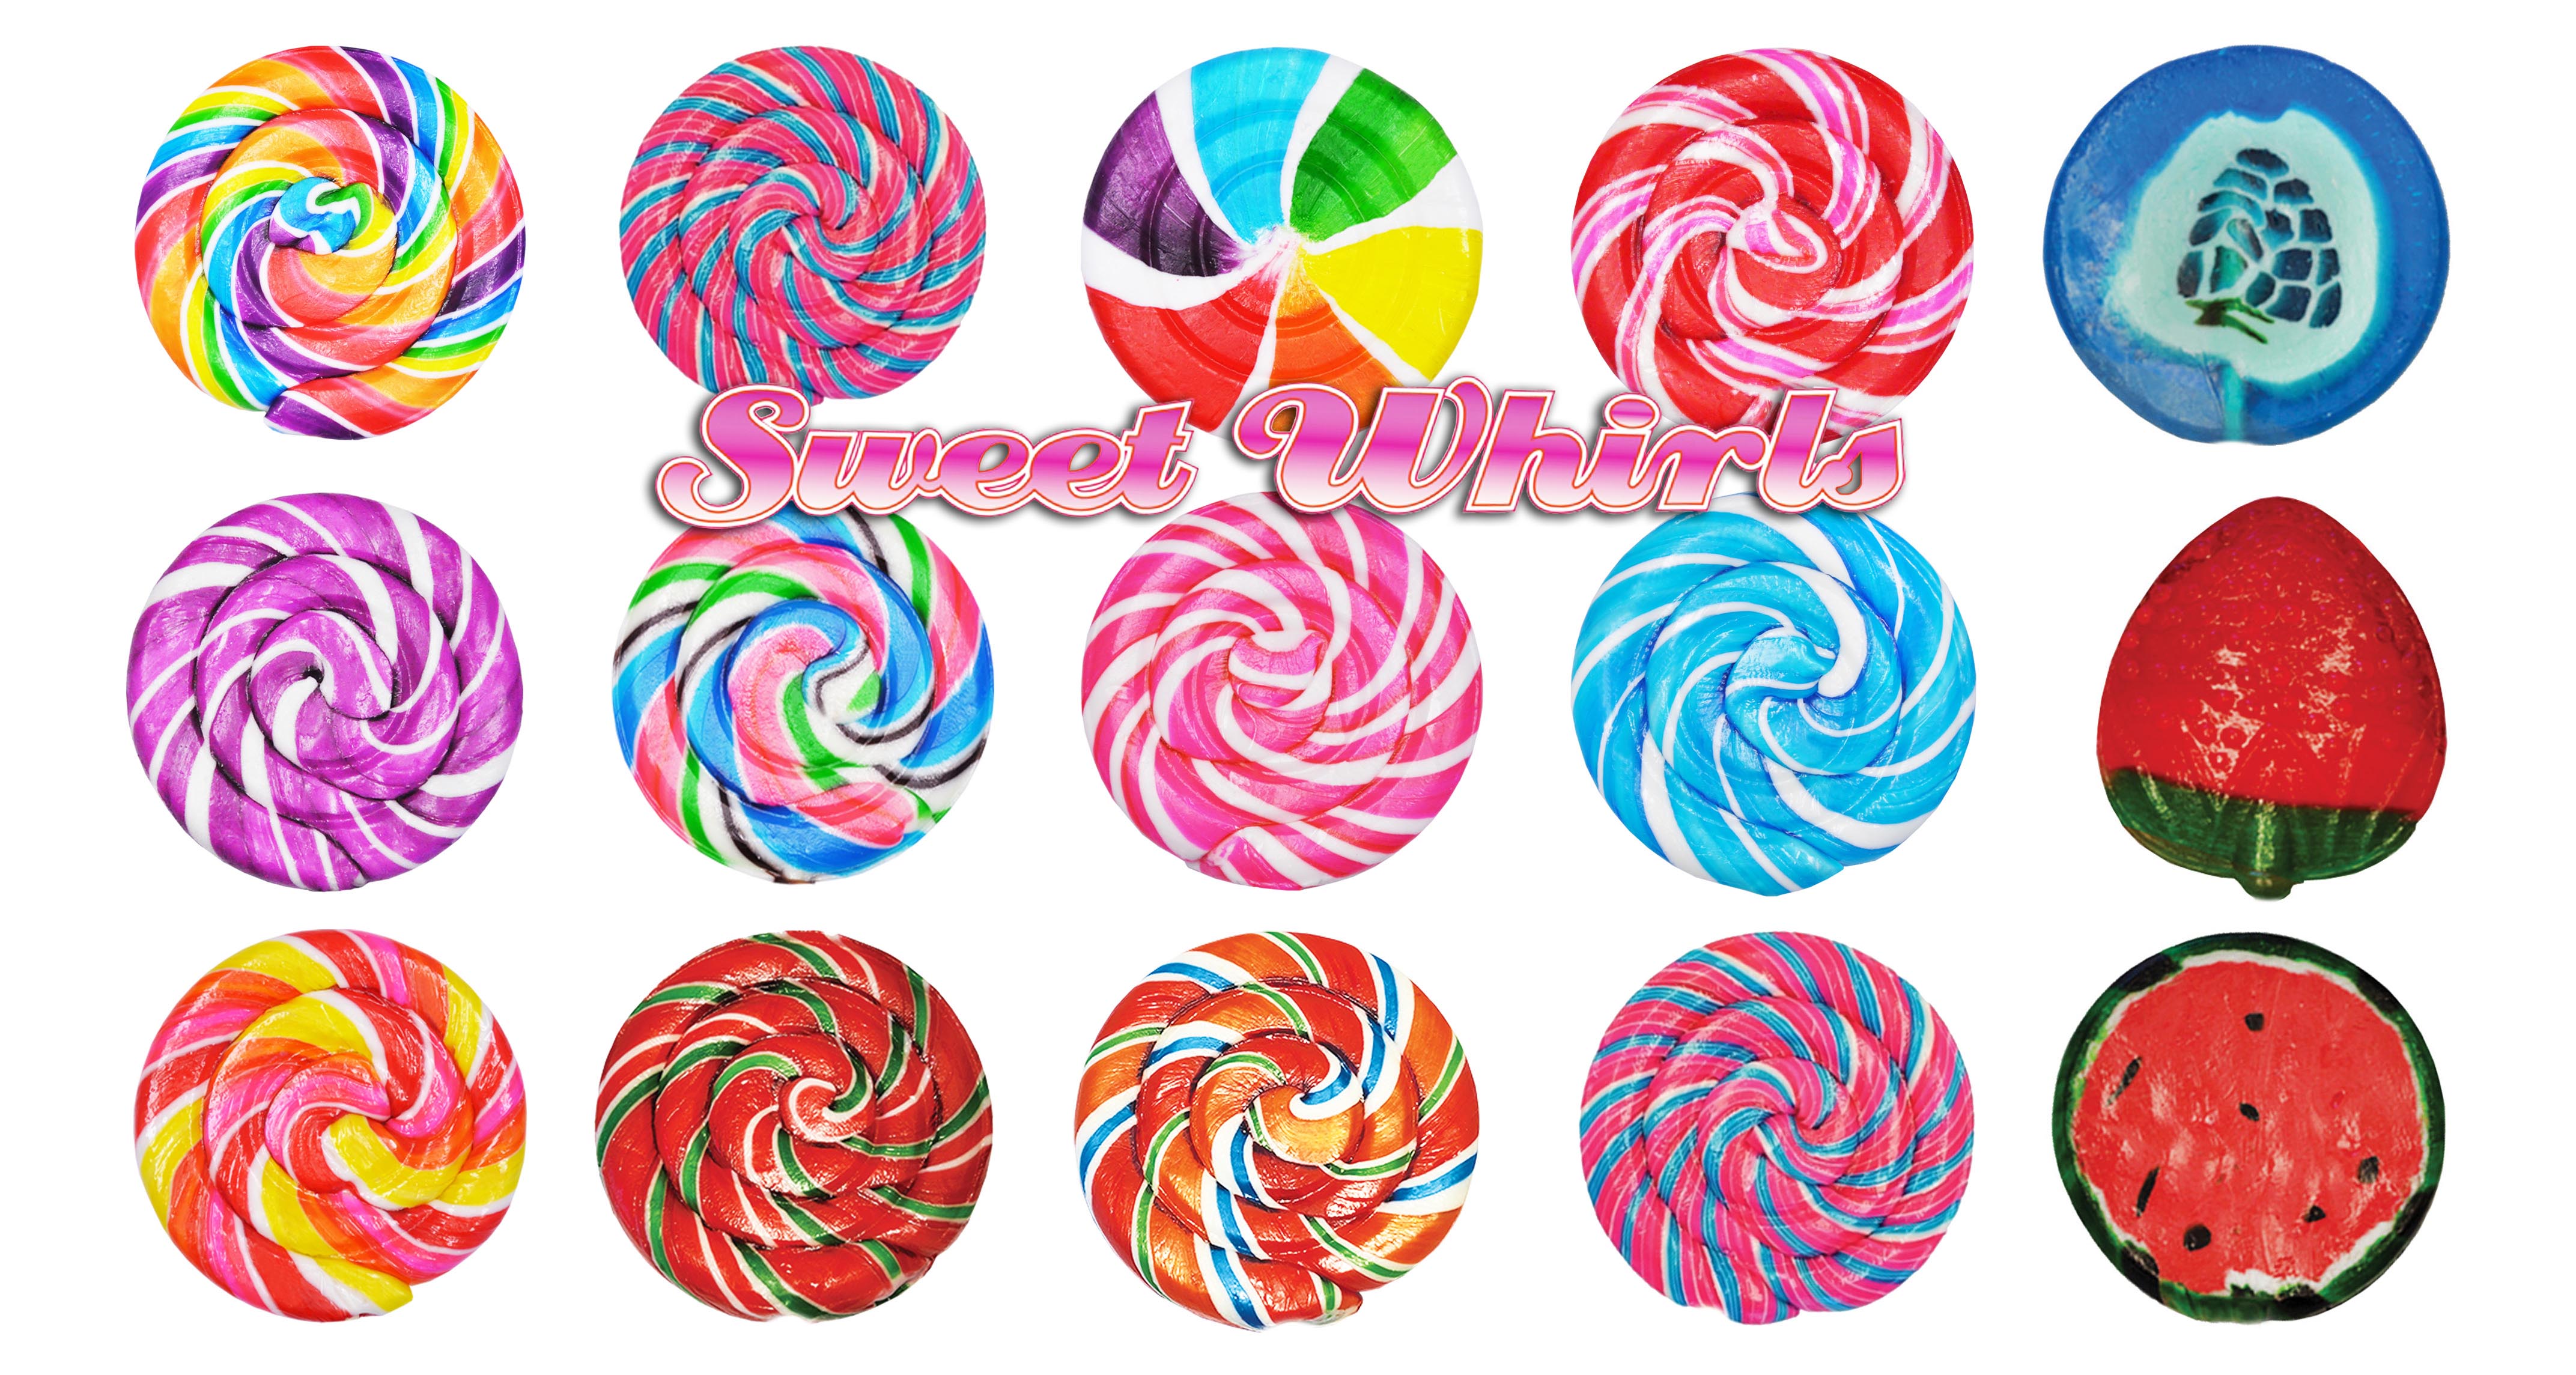 multiple swhirly lollipop candy including rainbow straeberry, cotton candy, strawberry color wheel, strawberry cream, rainbow strawberry sherbert, grape, cream soda, cotton candy, blueberry, fruit punch, cherry, and dalgona